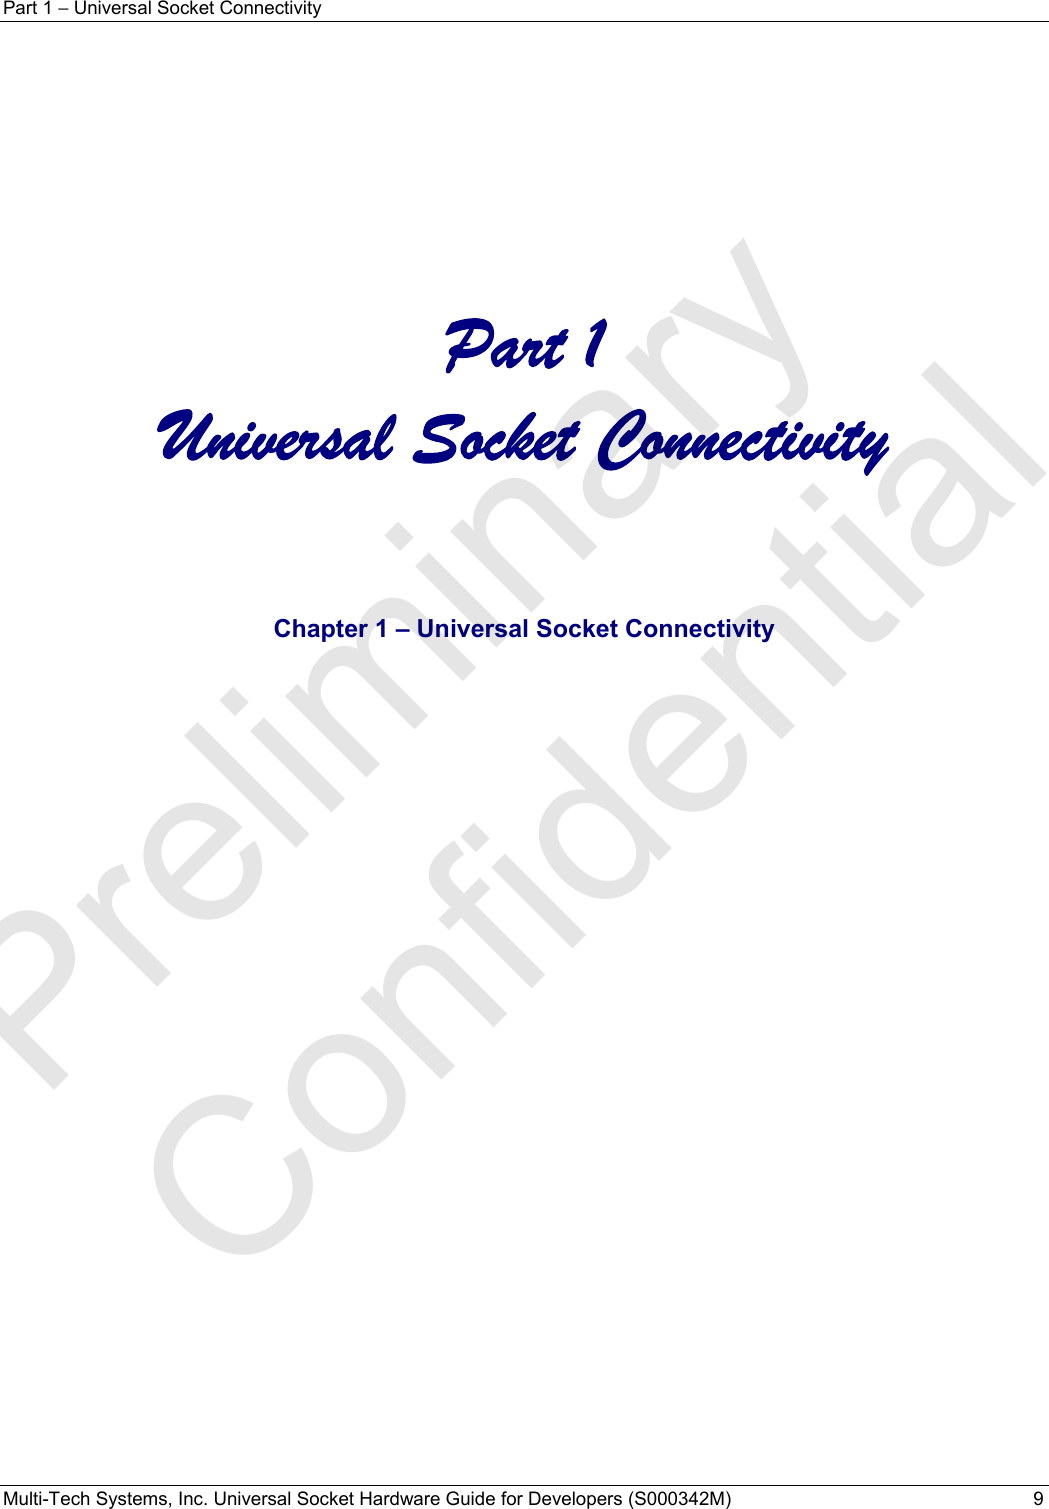 Part 1 − Universal Socket Connectivity Multi-Tech Systems, Inc. Universal Socket Hardware Guide for Developers (S000342M)  9           Part 1 Universal Socket Connectivity     Chapter 1 – Universal Socket Connectivity   Preliminary  Confidential